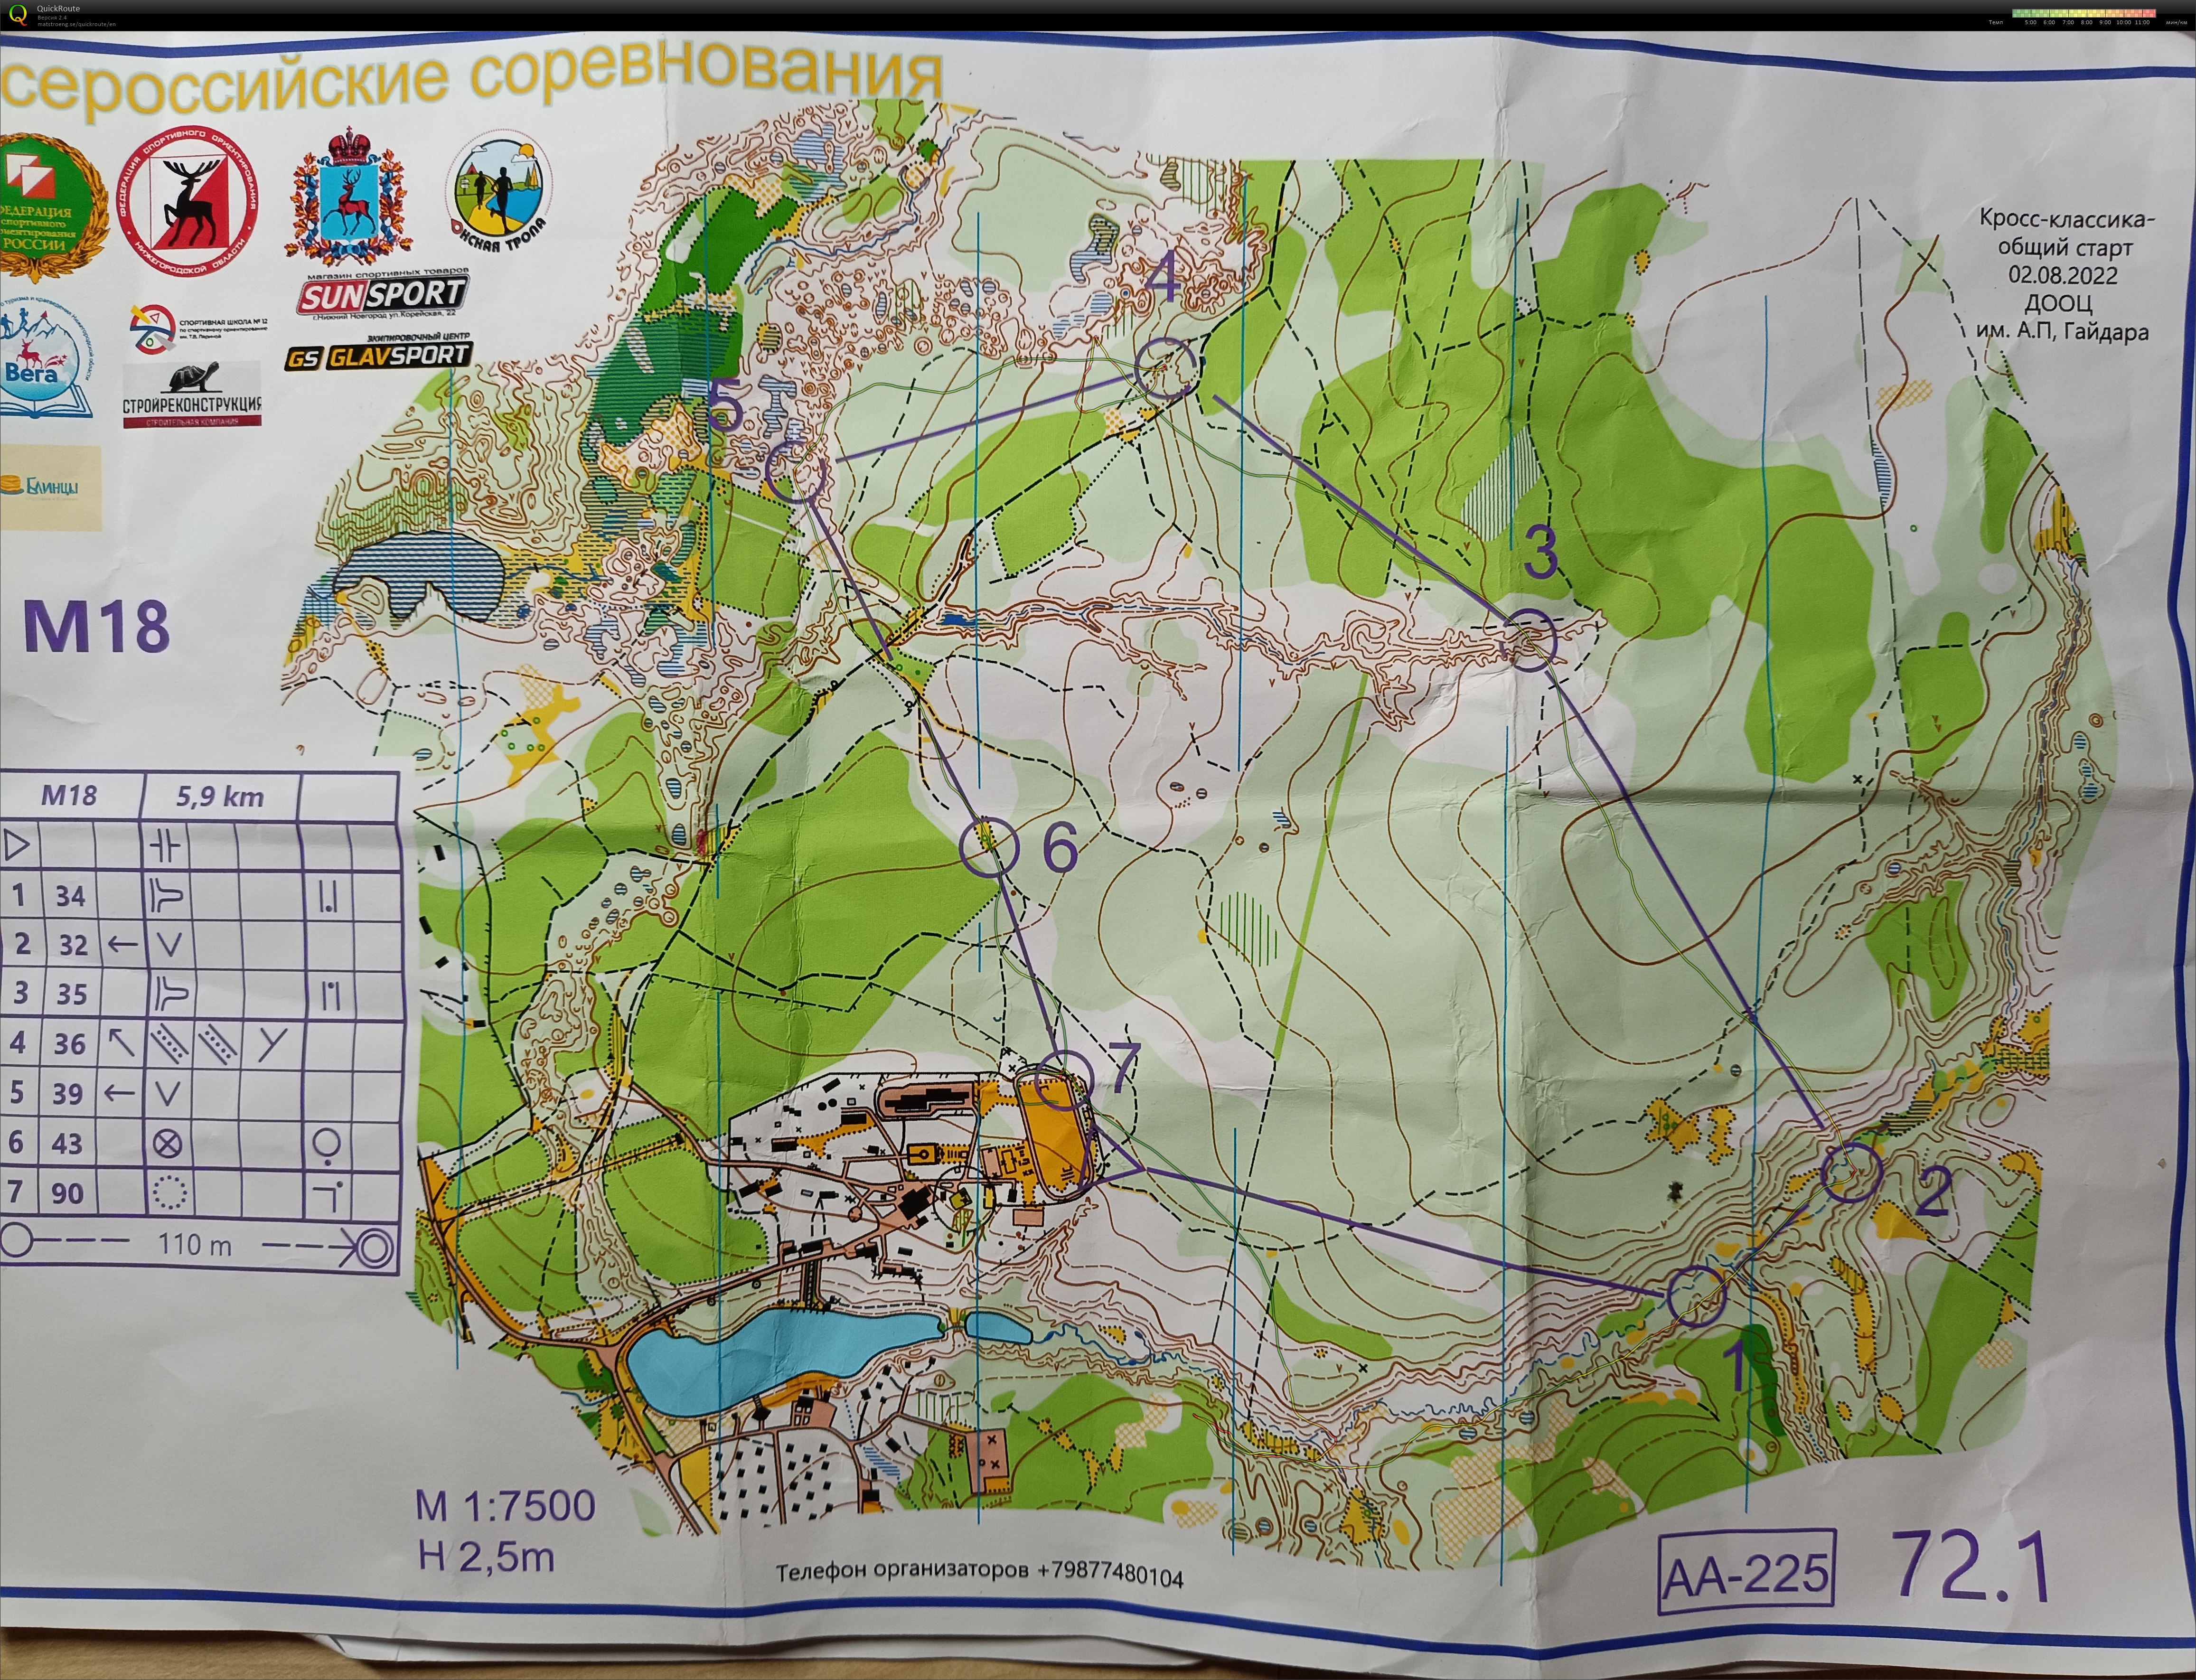 Map with track - ВС Ворсма, area - классика масс старт 1 круг, from orienteering map archive of Ilya Rogov